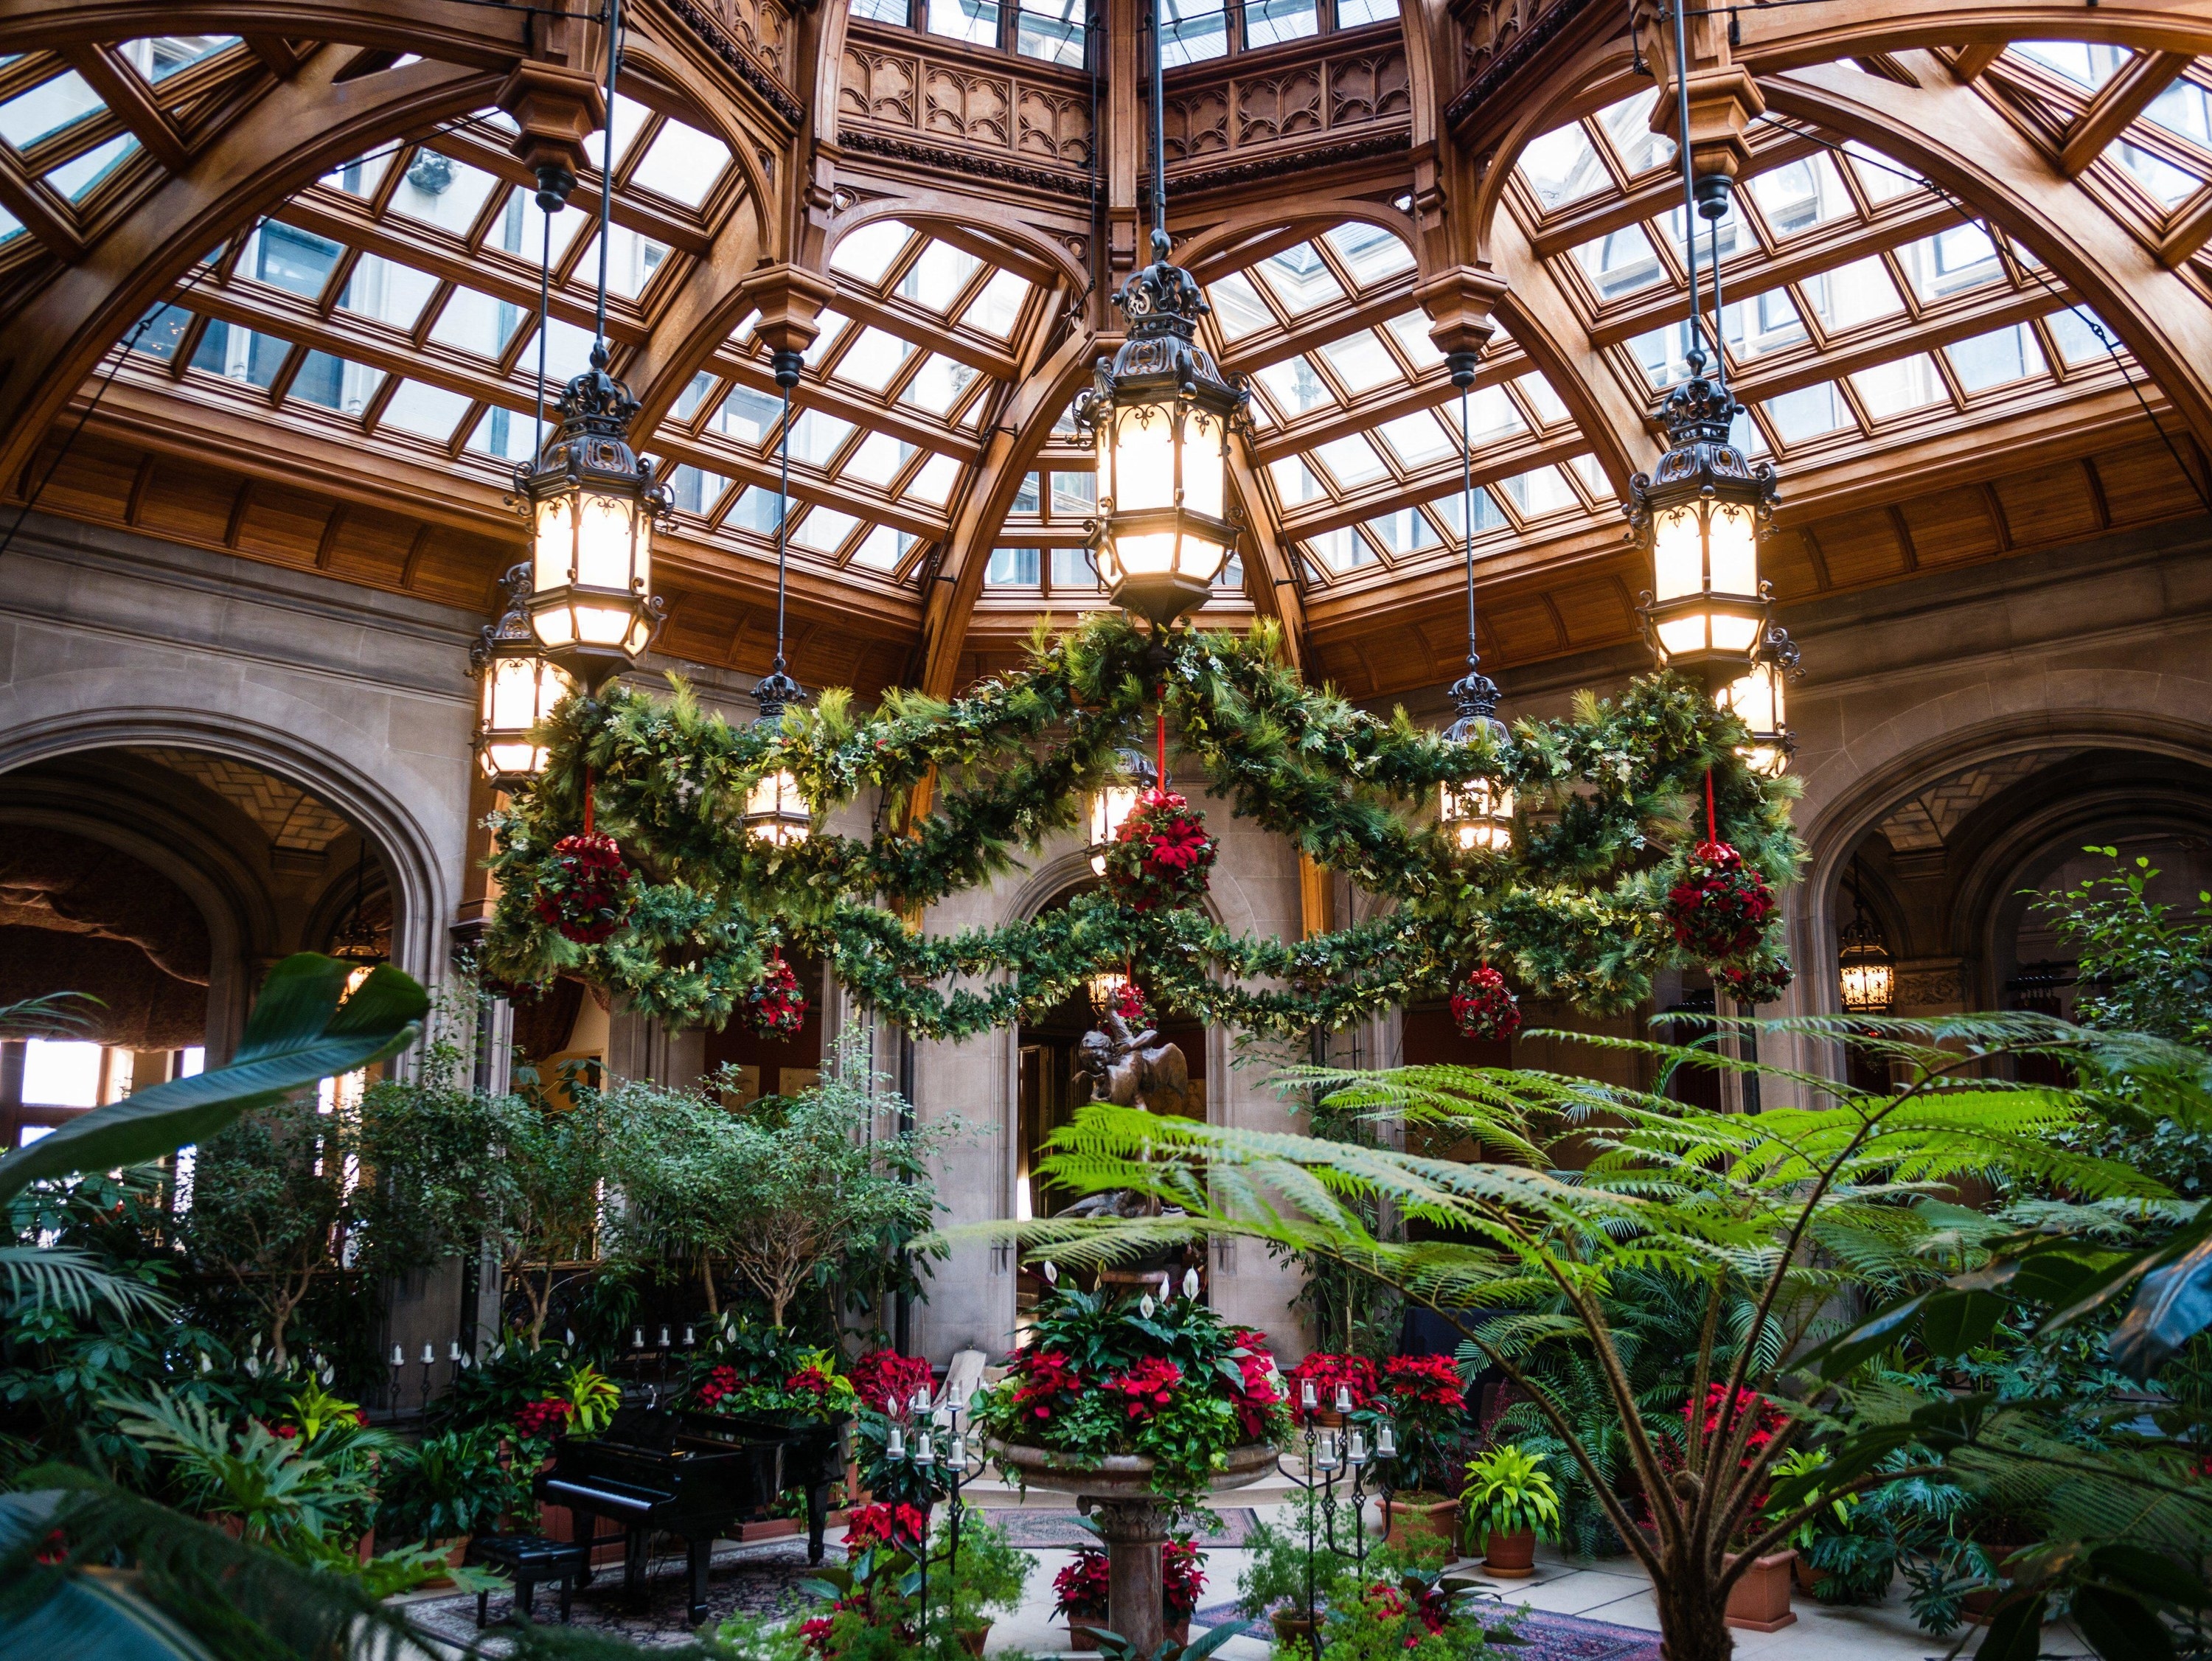 Inside the Biltmore decorated for Christmas with garland and poinsettas